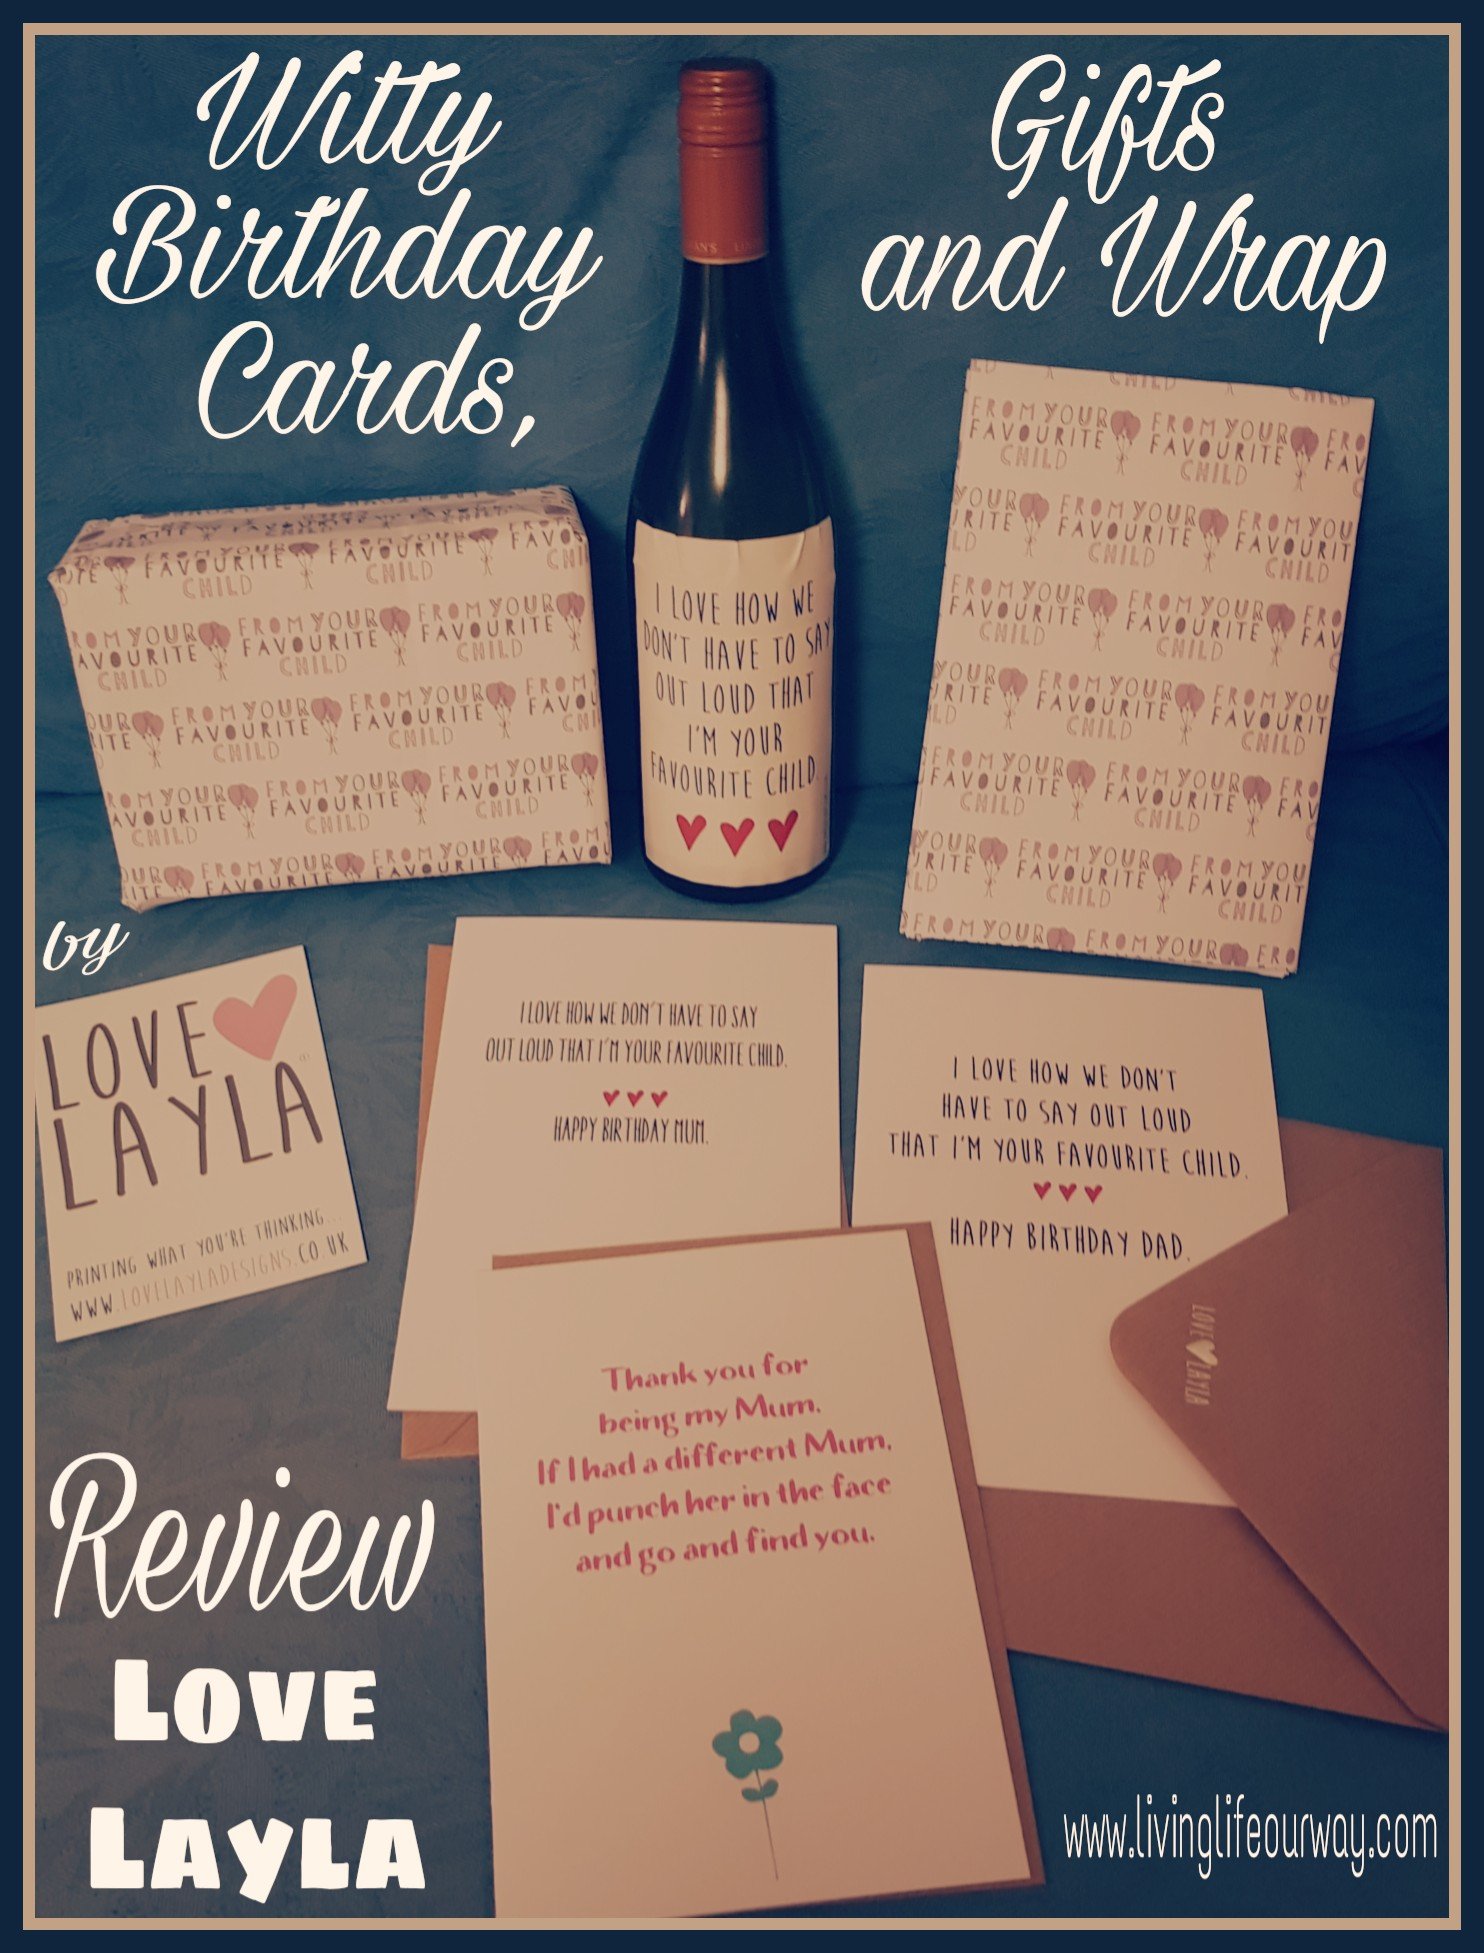 Love Layla greetings card, wrap and wine label for favourite child range.